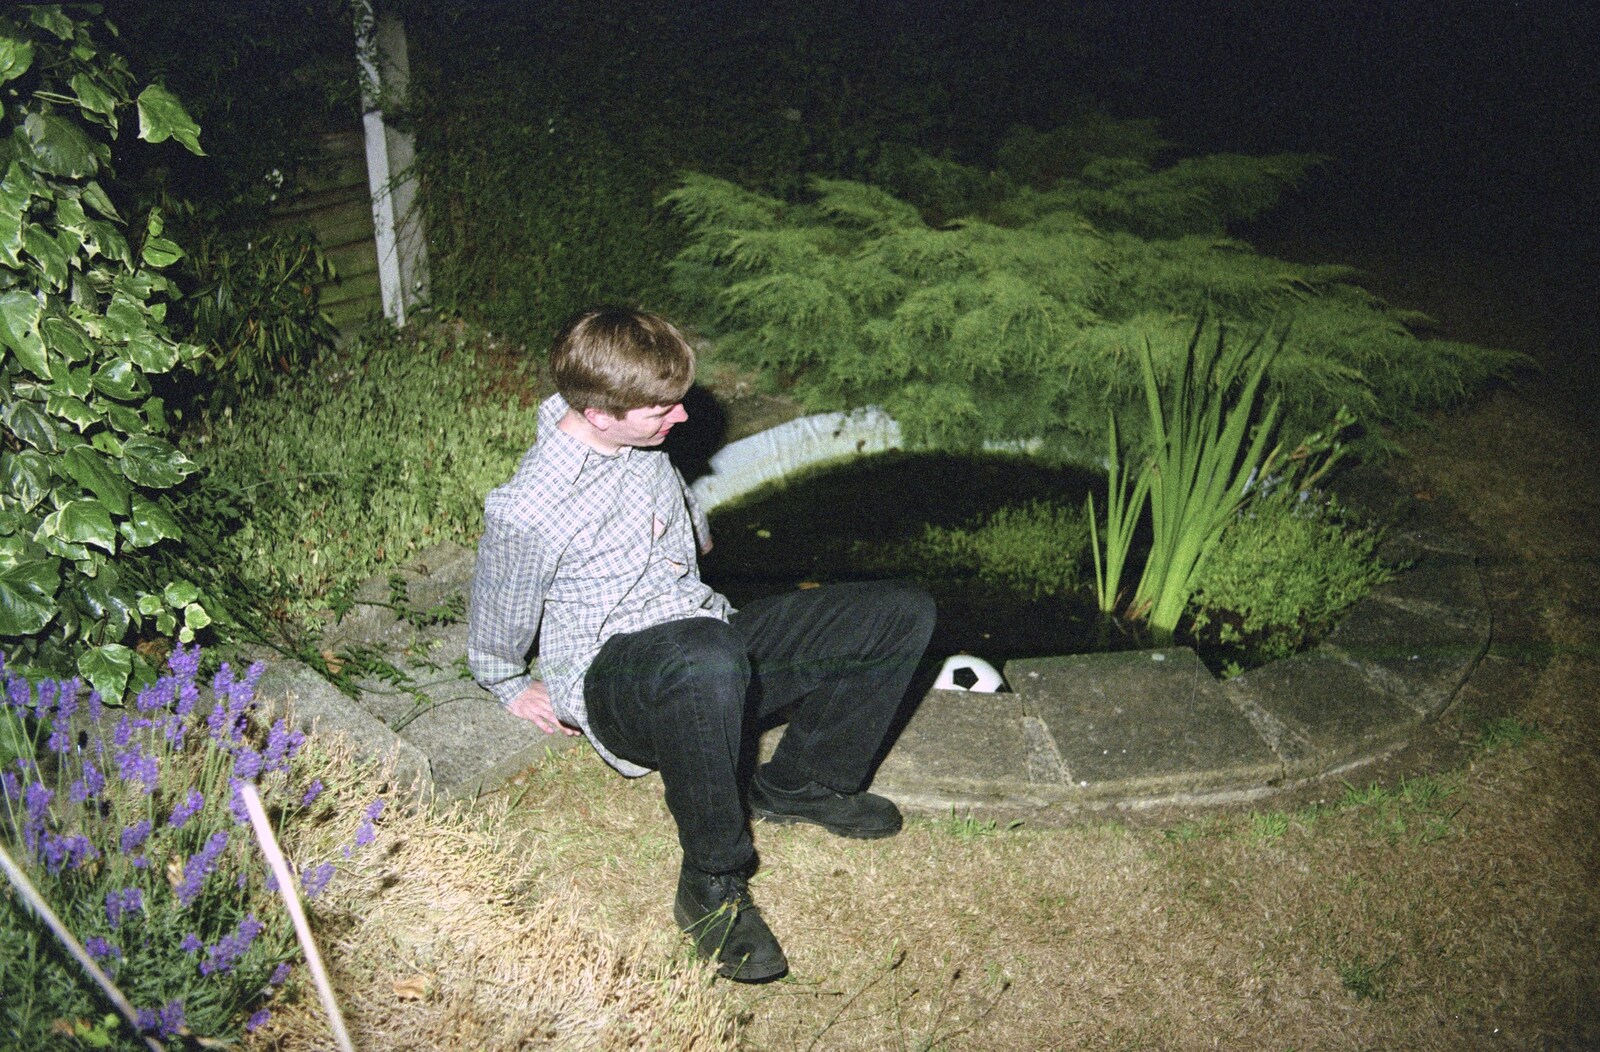 Paul fishes the football out of the pond from Andrew's CISU Party, and Nosher's Garden Barbeque, Ipswich and Brome, Suffolk - June 10th 1998